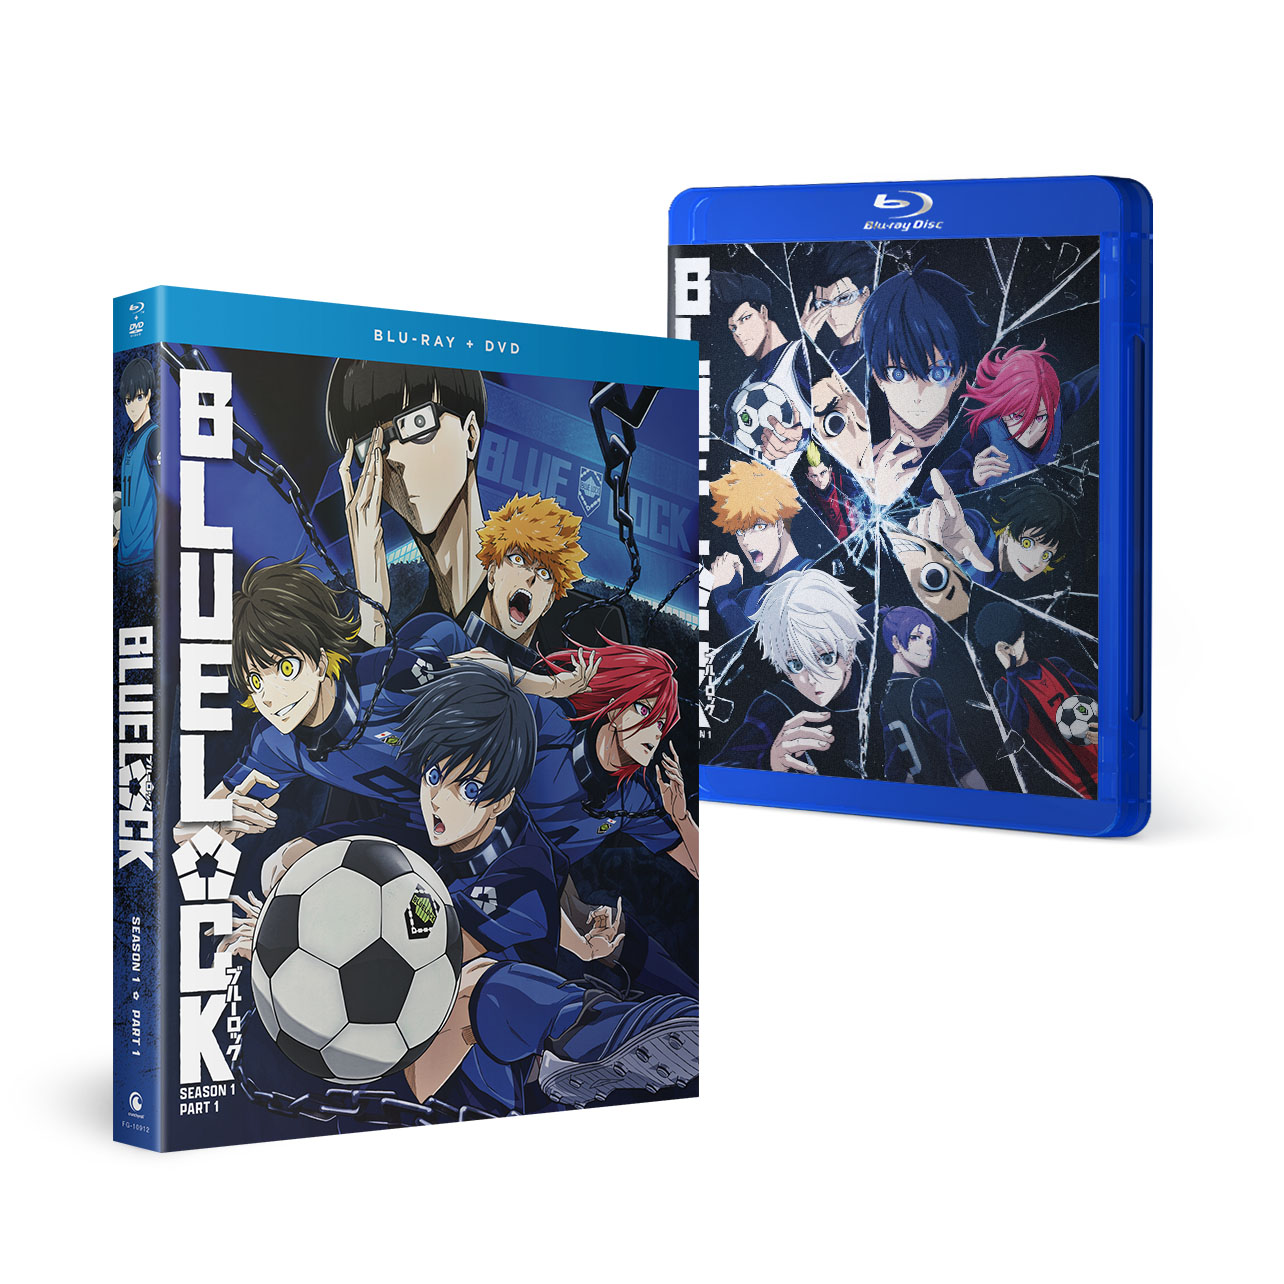 DVD BLUELOCK Episode 1-24END English Dubbed All Region FREESHIP